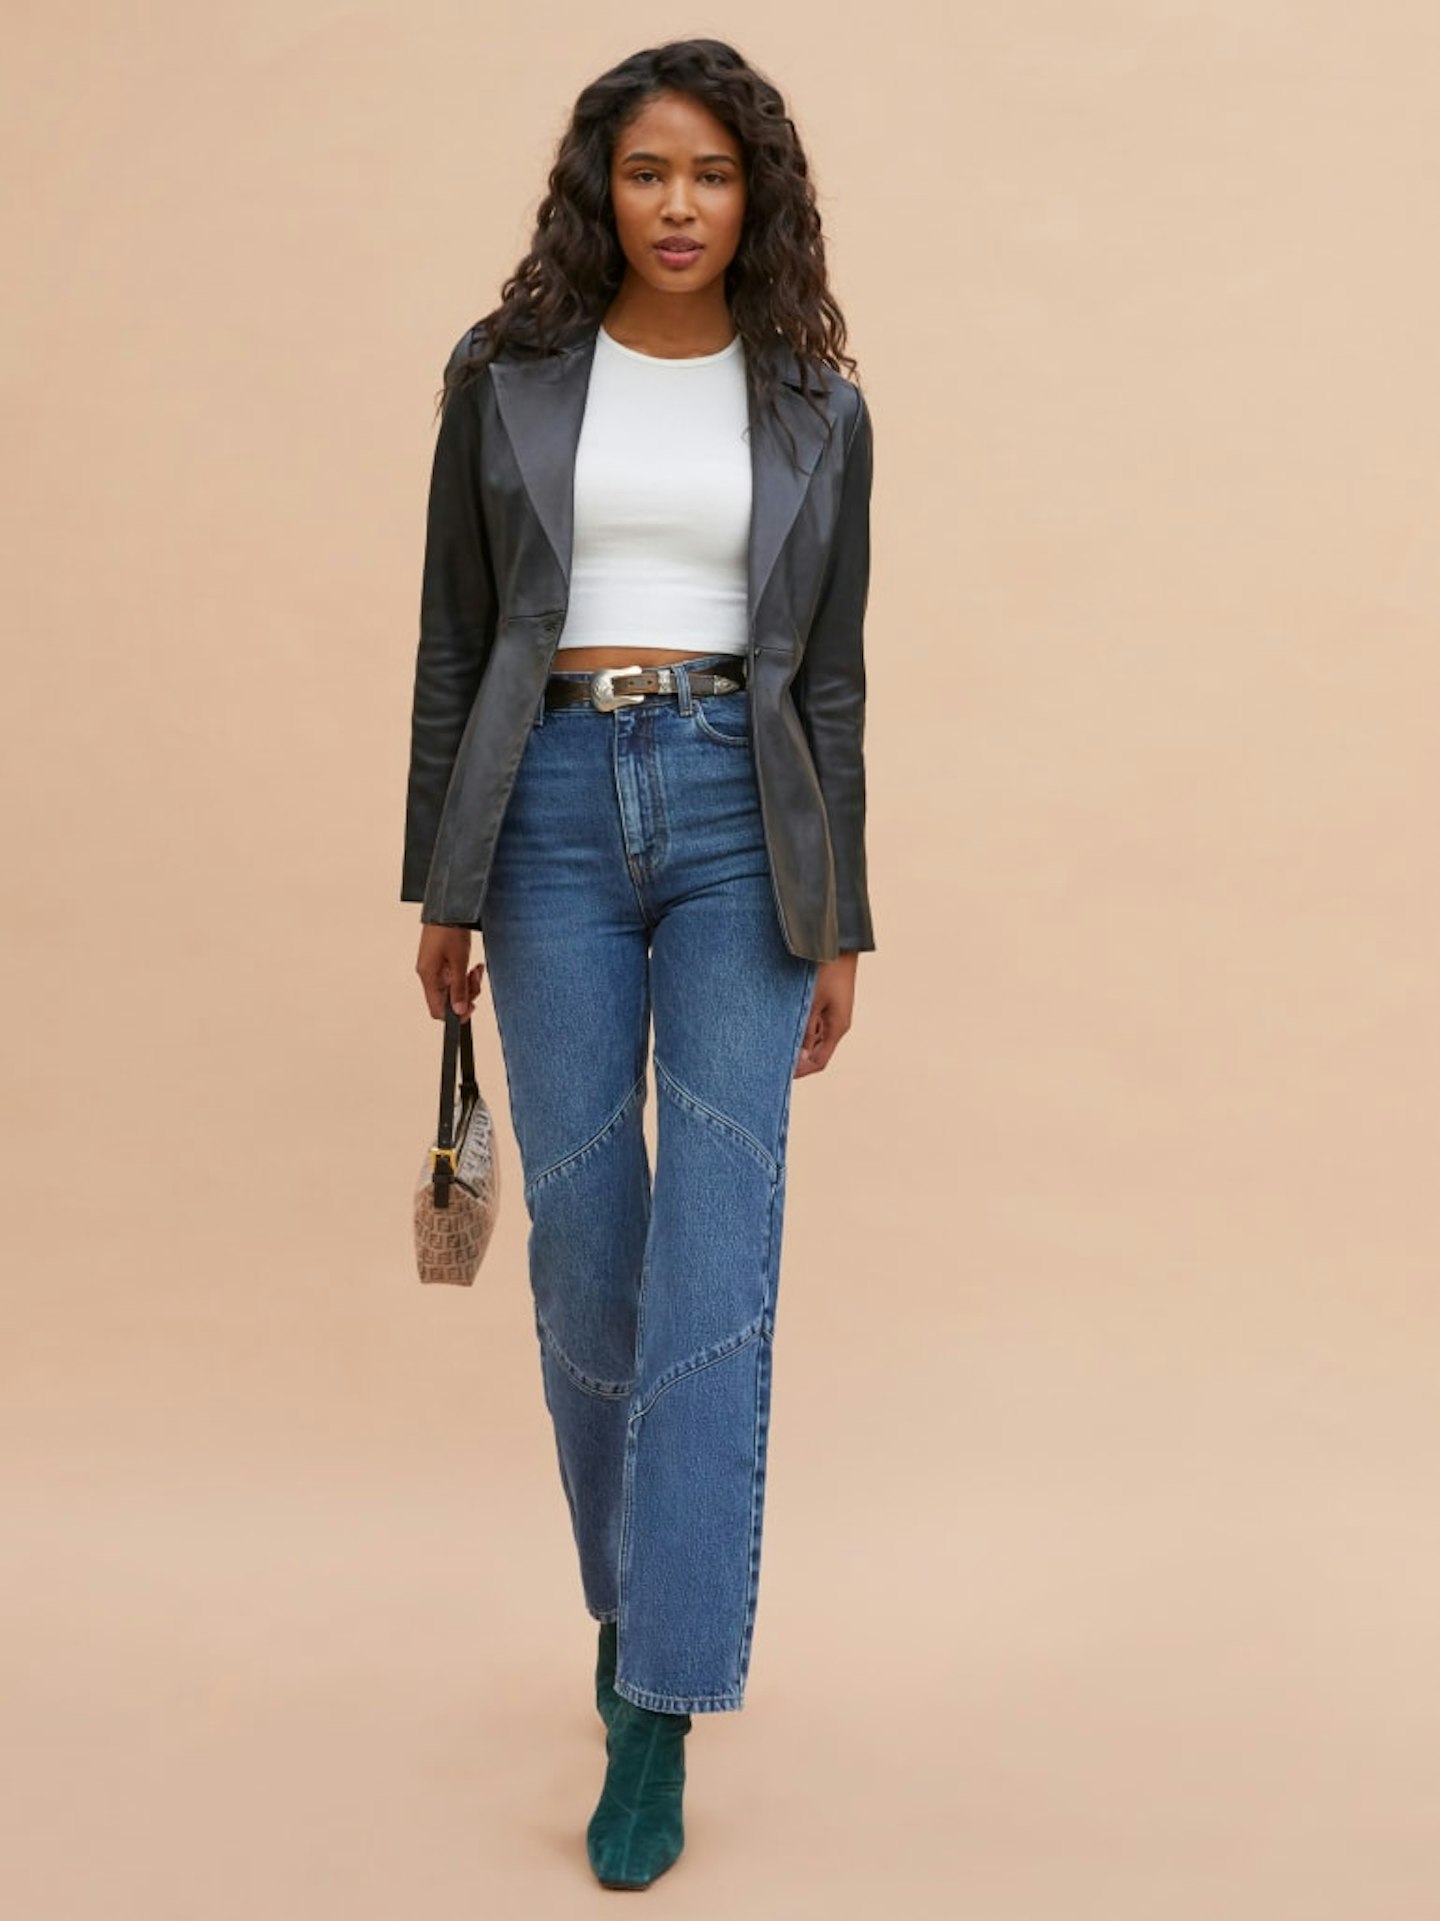 Reformation, Cynthia '80s Seamed High-Rise Straight Jeans, £160